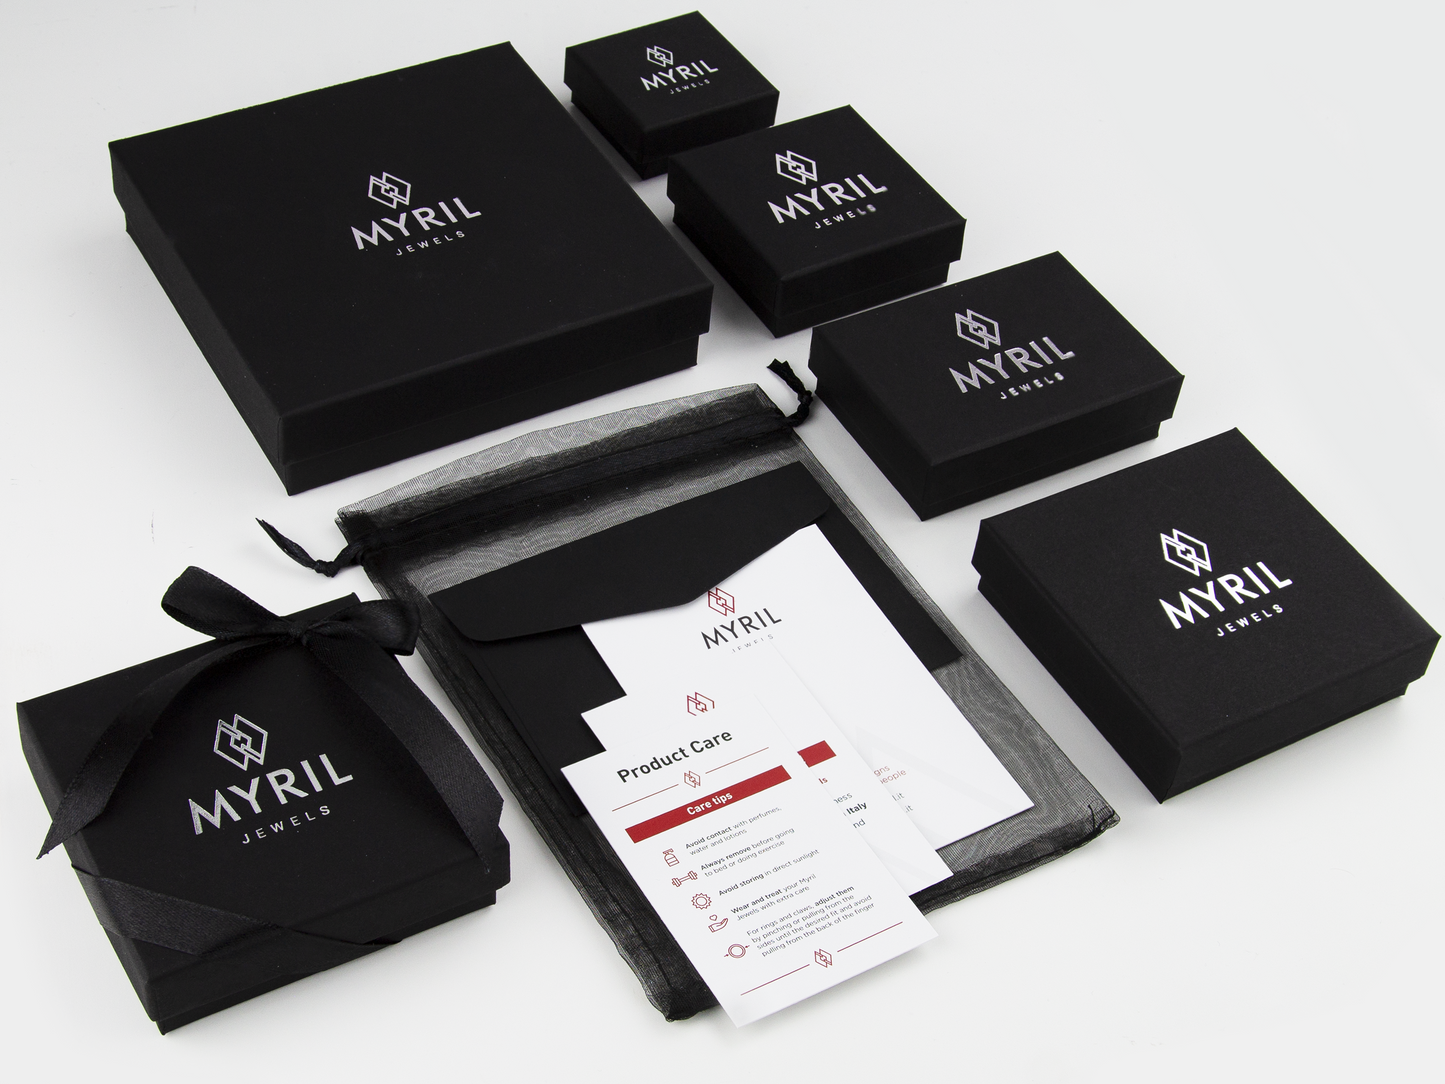 Assortment of Myril Jewels brand packaging, featuring elegant black boxes of various sizes with the company's logo in white, along with care instructions and black organza gift bags, representing sophisticated goth jewelry presentation and branding.